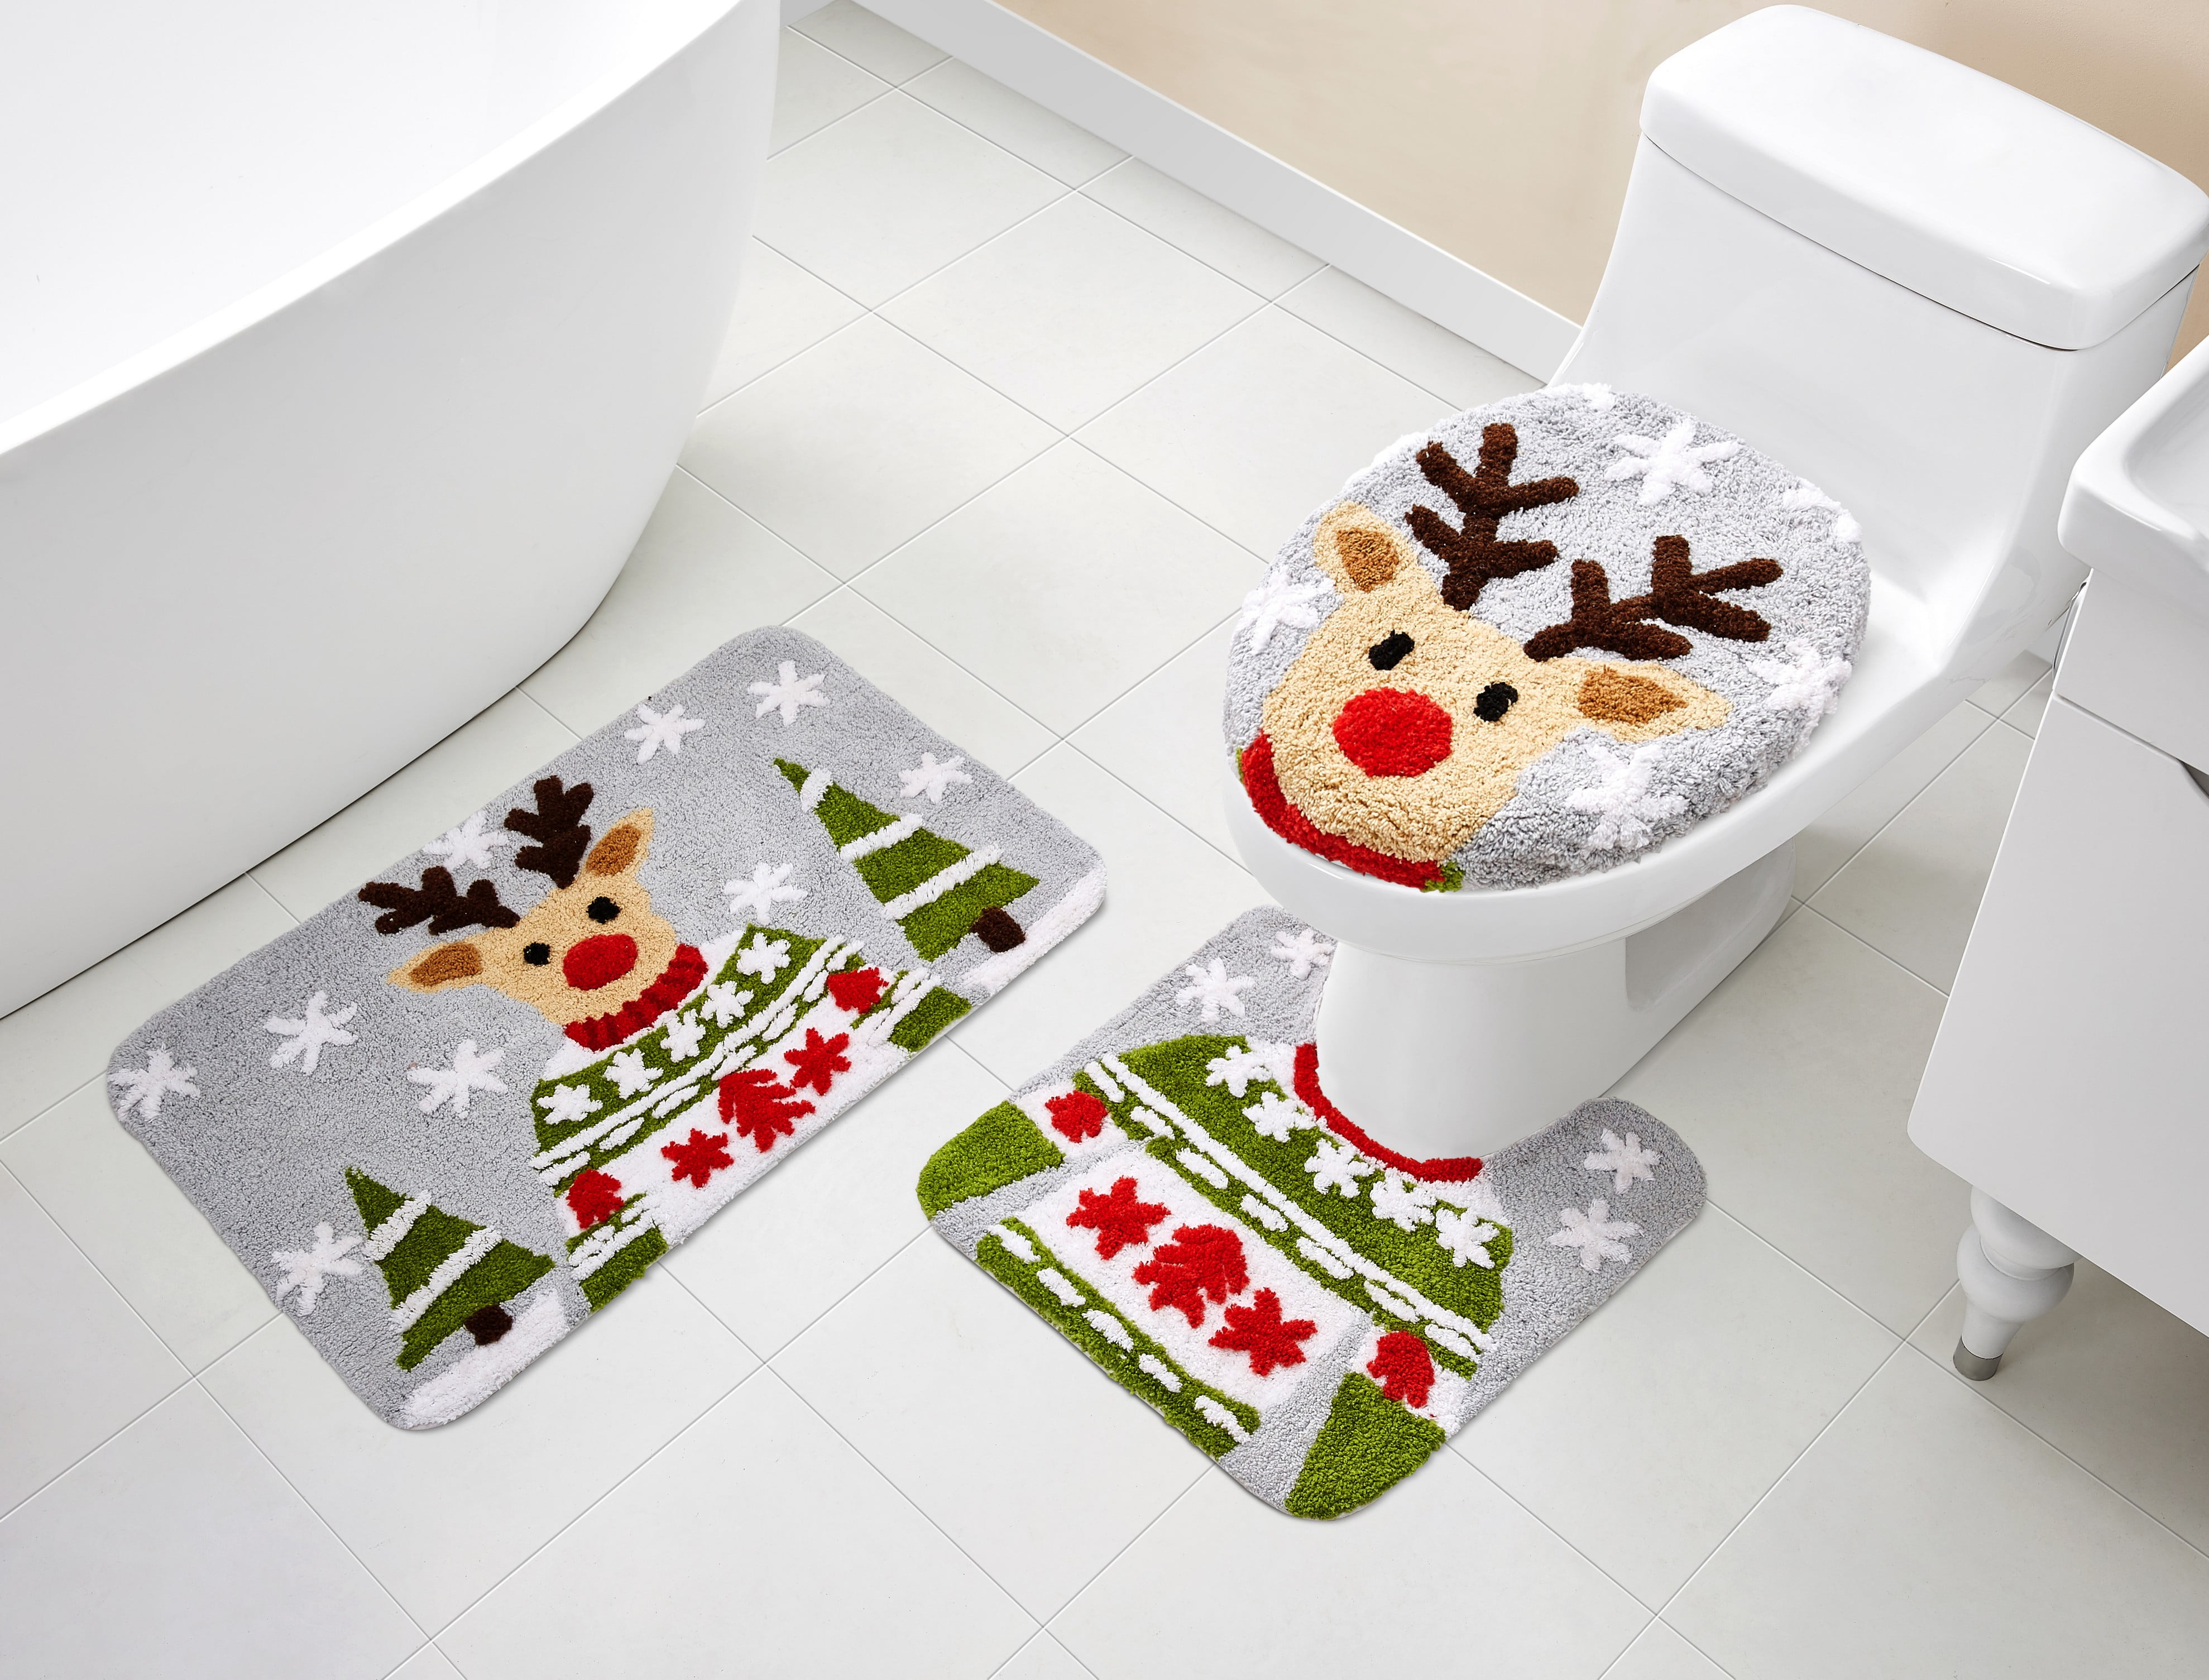 Toilet Seat Cover U-Shaped Toilet Floor Mat,Small Zadaling 3-Piece Bath Rug Mat Sets,Grey Christmas Theme Geometric Square Snowflakes Absorbent Non-Slip Bathroom Doormat Runner Rugs 